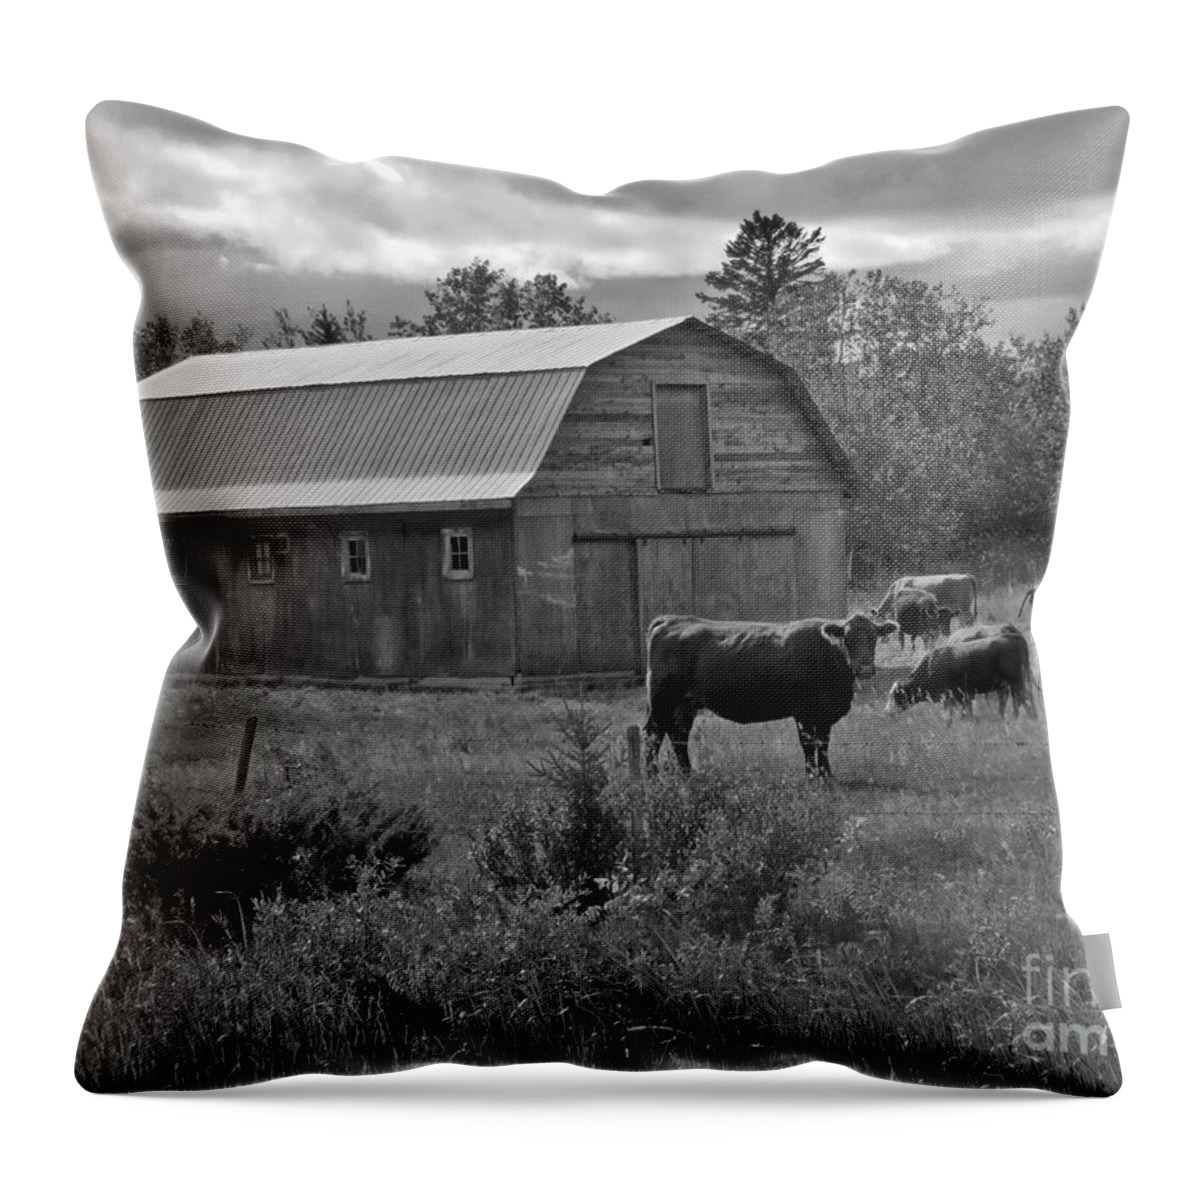 Canada Throw Pillow featuring the photograph Cattle Farm by Mary Mikawoz